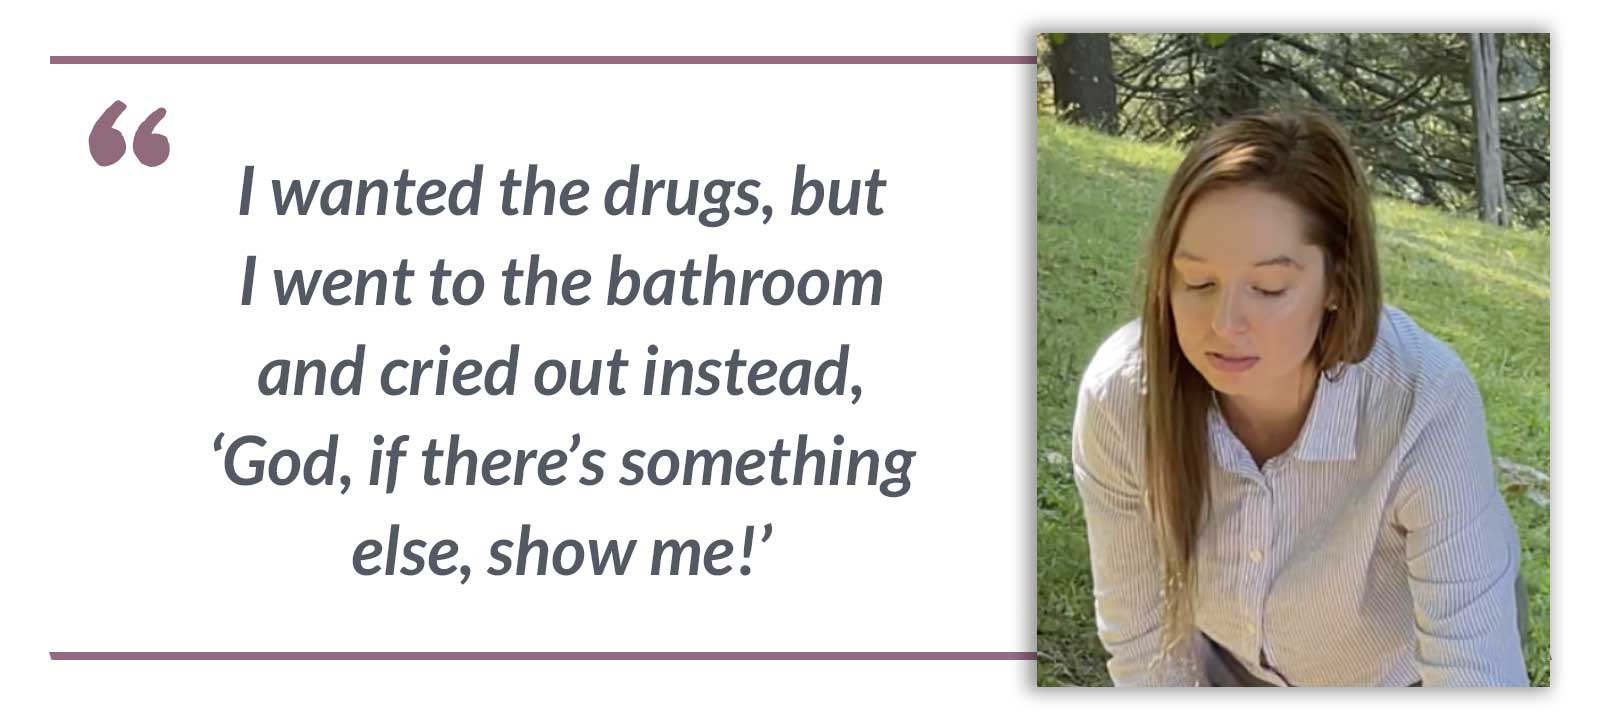 I wanted the drugs, but I went to the bathroom and cried out instead, ‘God, if there’s something else, show me!’-Autumn